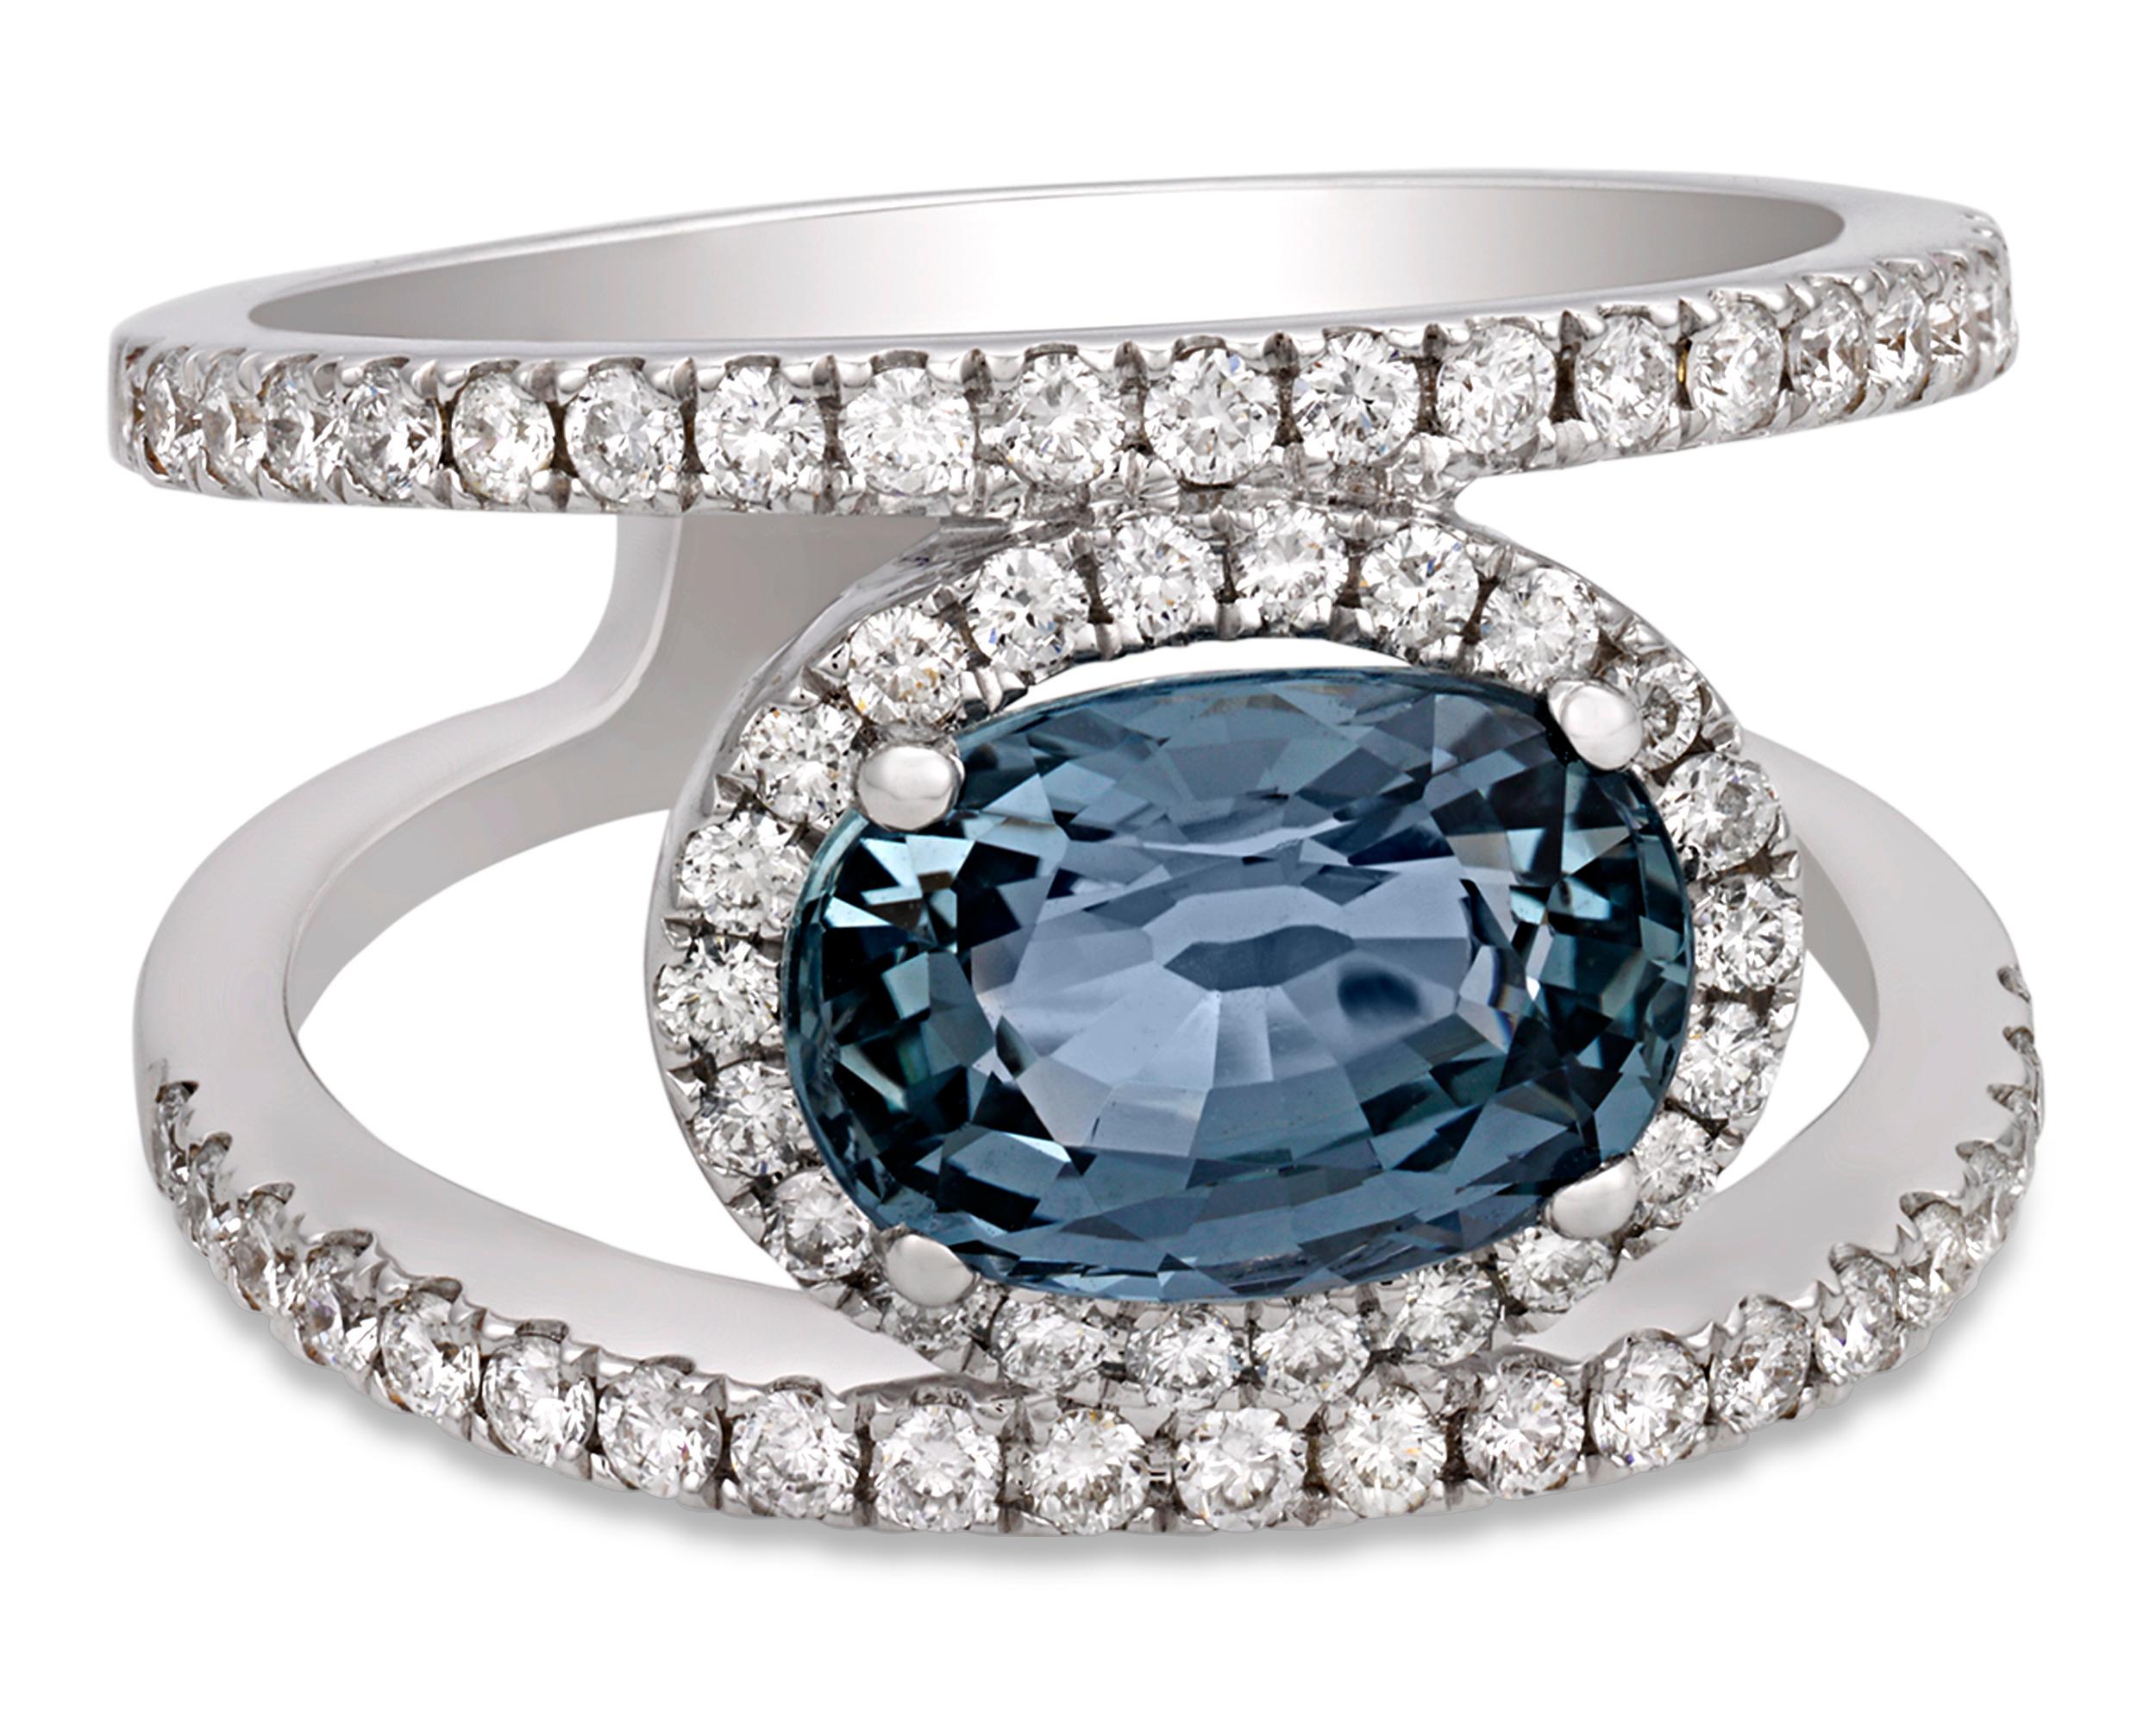 The exceptional 2.20-carat sapphire at the center of this one-of-a-kind ring exhibits a lovely soft grayish blue coloring. The natural beauty of this oval-shaped stone is highlighted by a unique double band setting studded with 0.39 carat of white